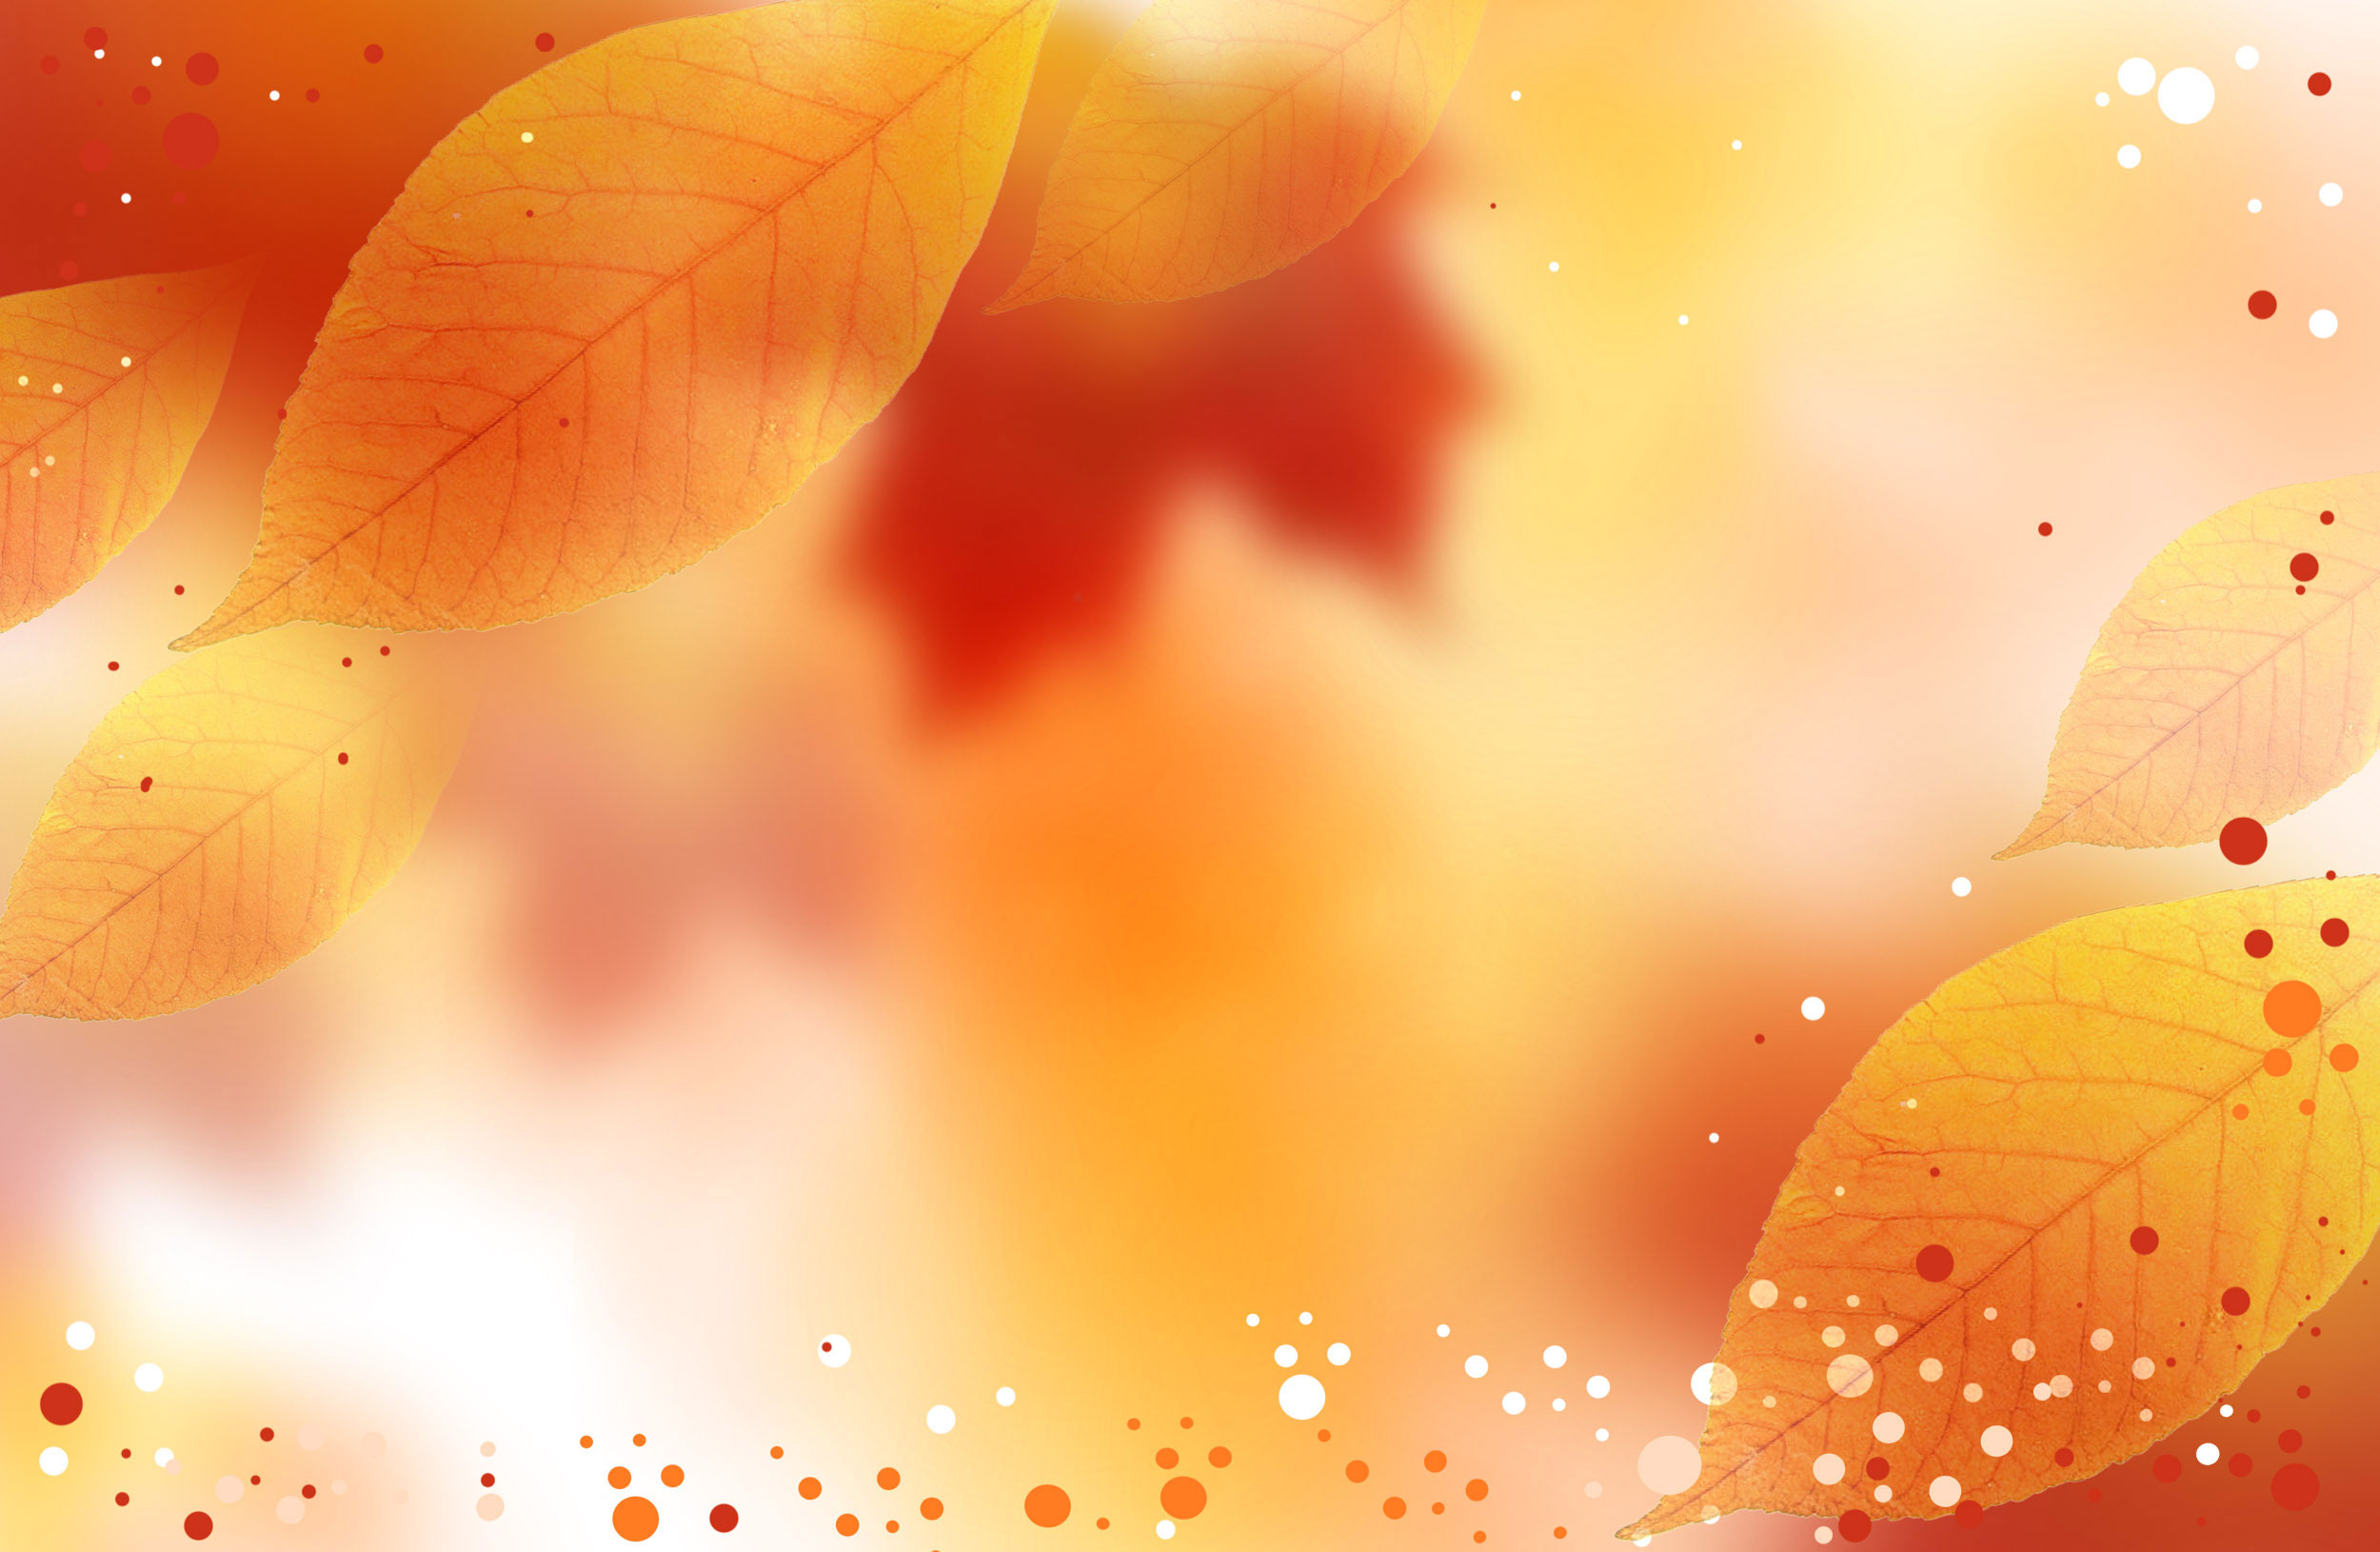 copy space colourful fall background frame 17 autum fall background